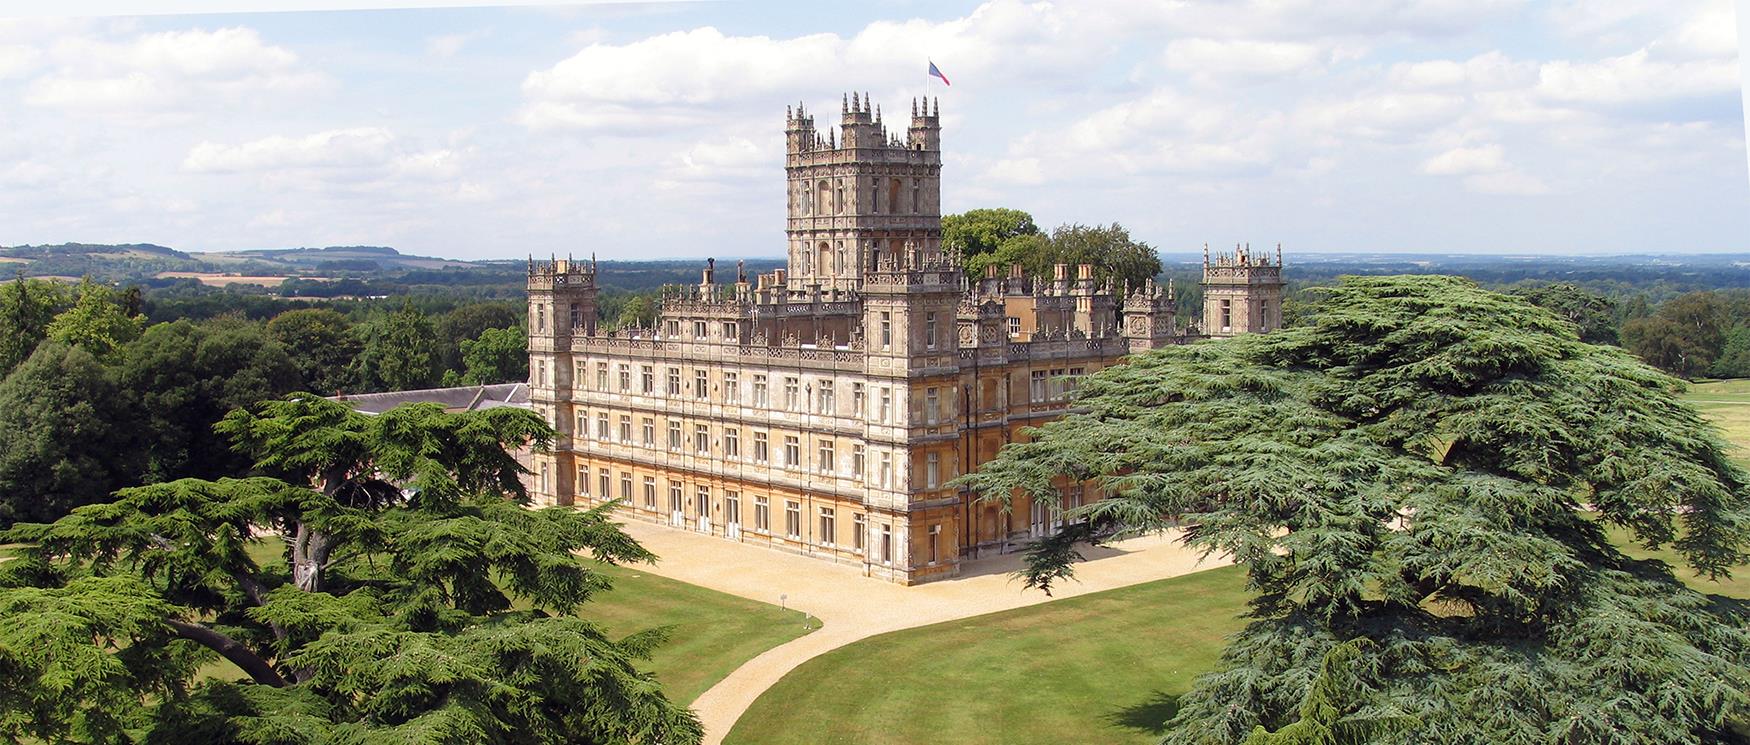 Highclere Castle The Real Downton Abbey